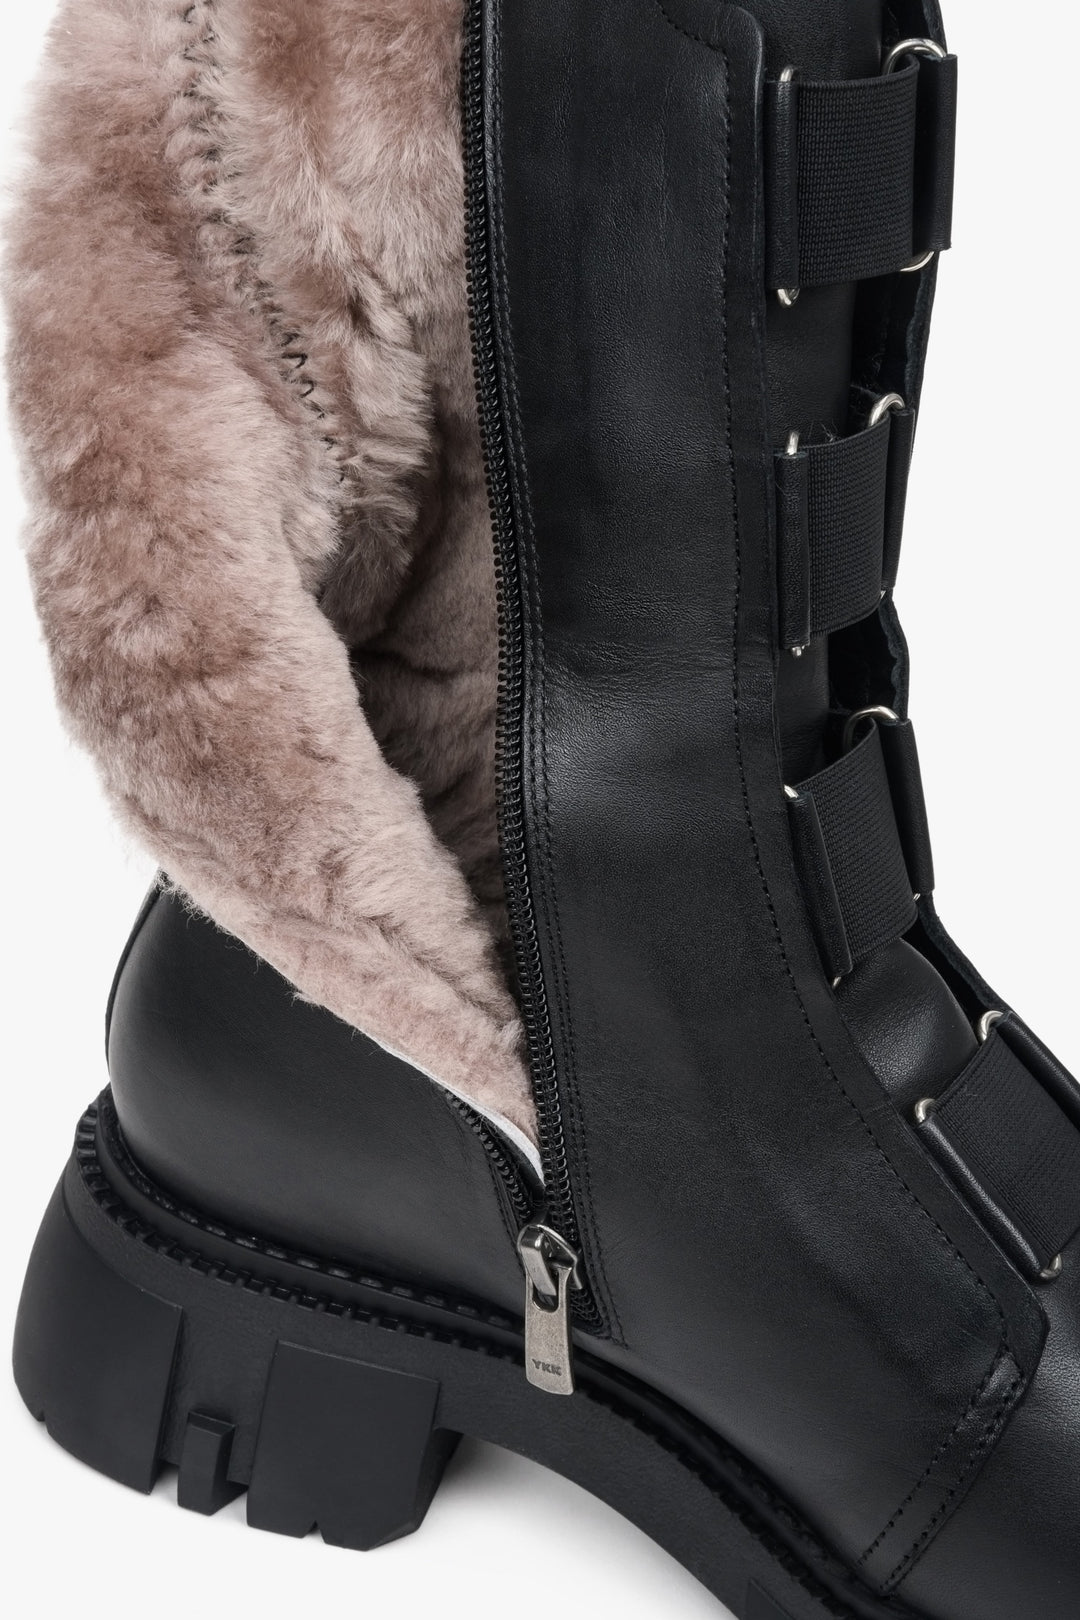 High black women's leather boots by Estro - close-up on the shaft.